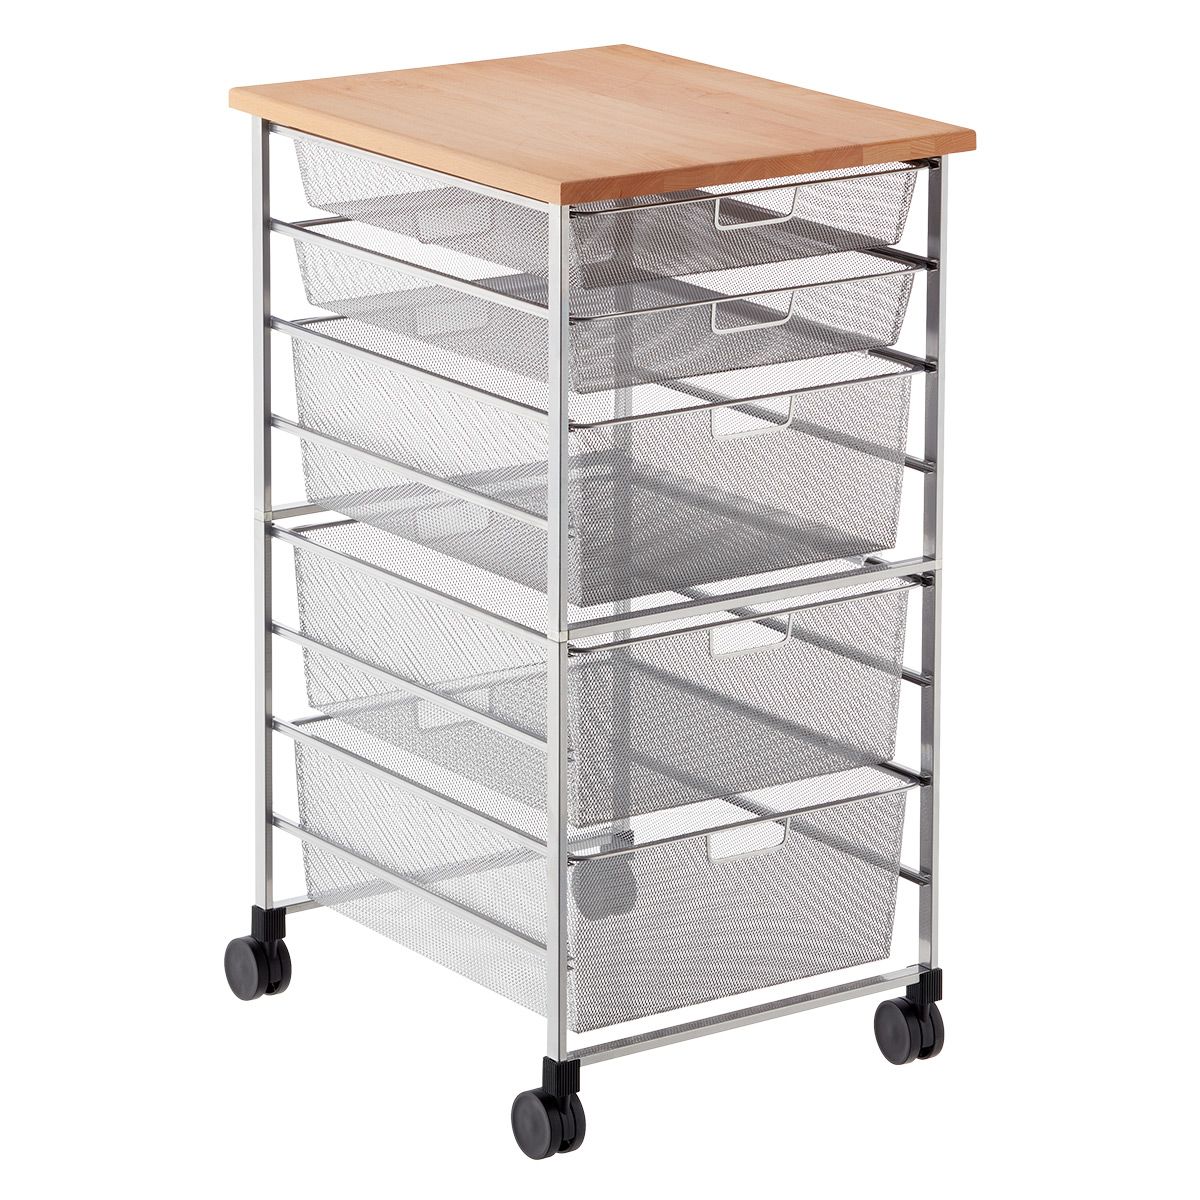 Elfa Mesh Kitchen Cart | The Container Store